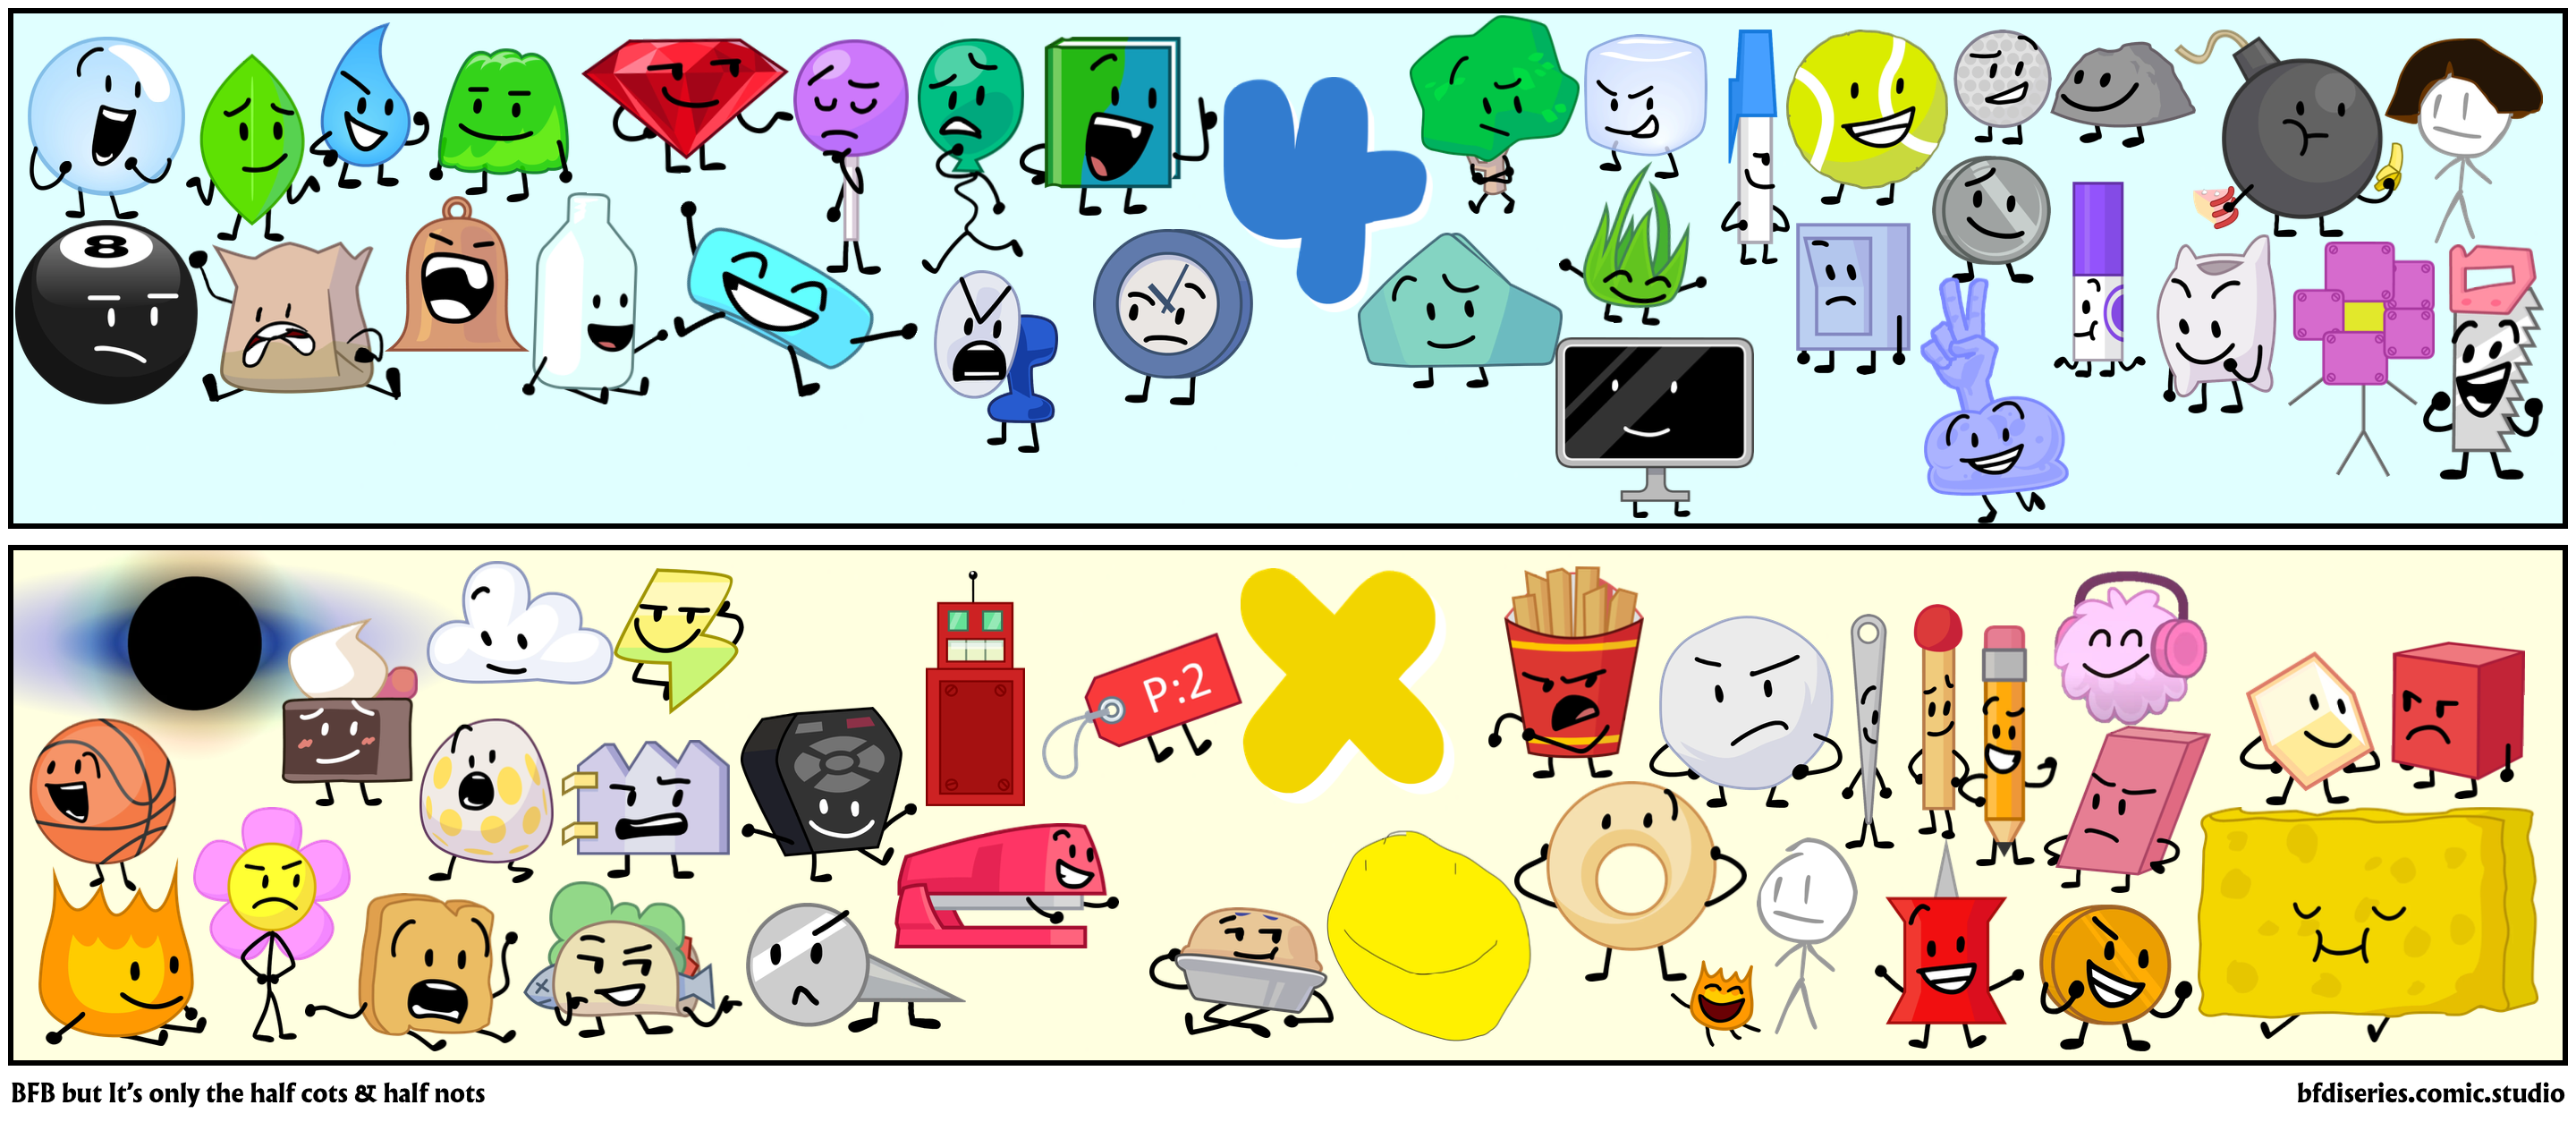 BFB but It’s only the half cots & half nots